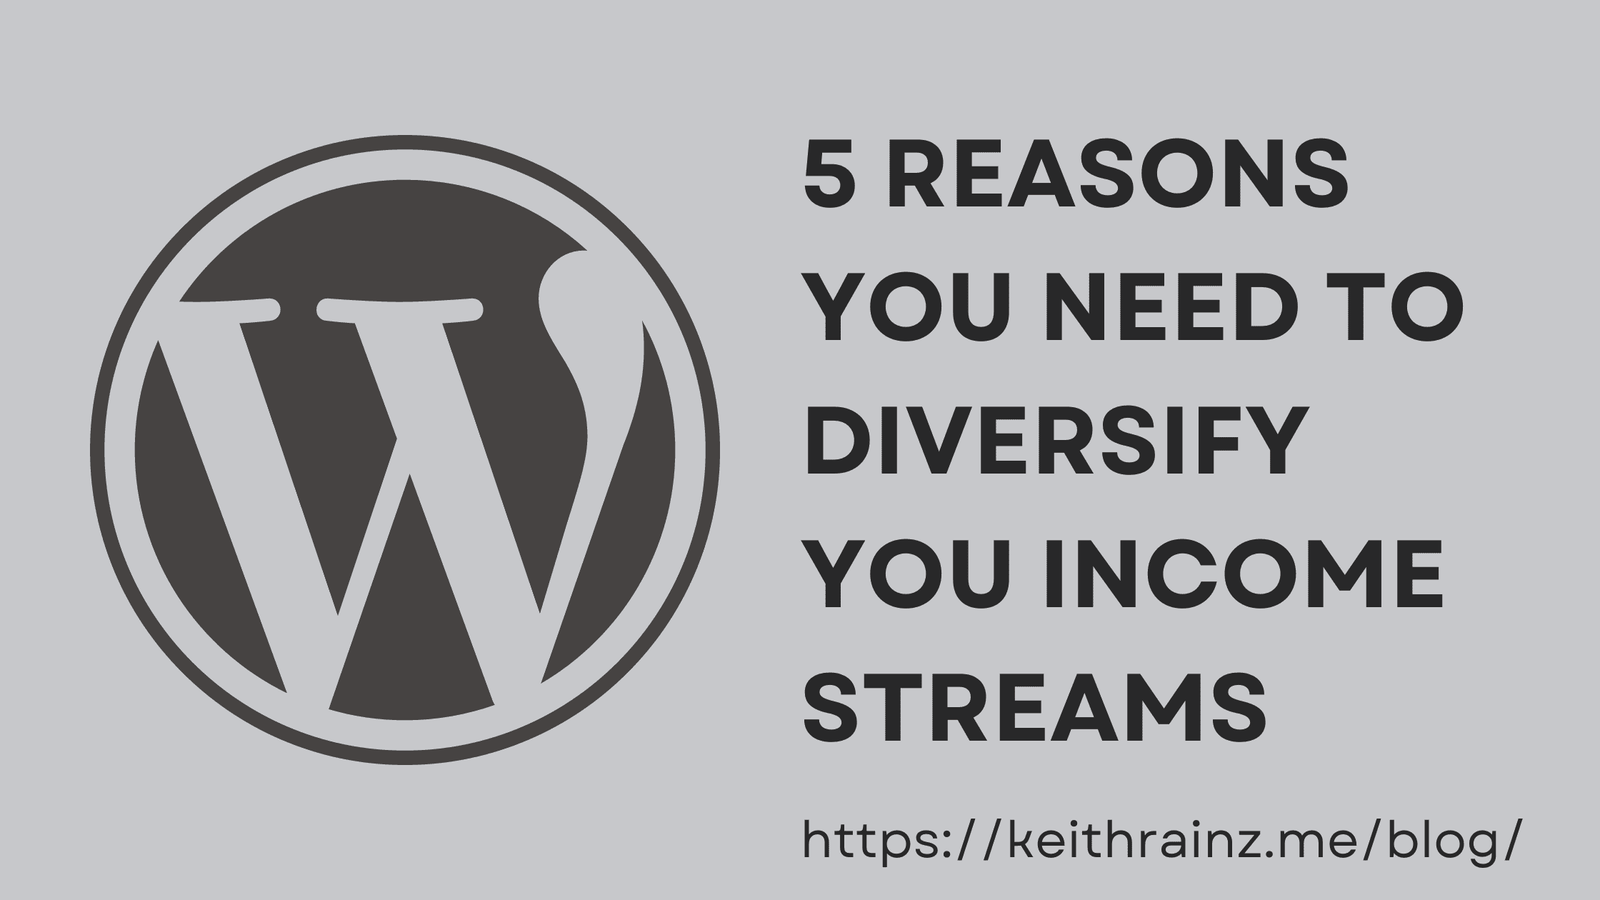 5 Reasons You Need To Diversify You Income Streams